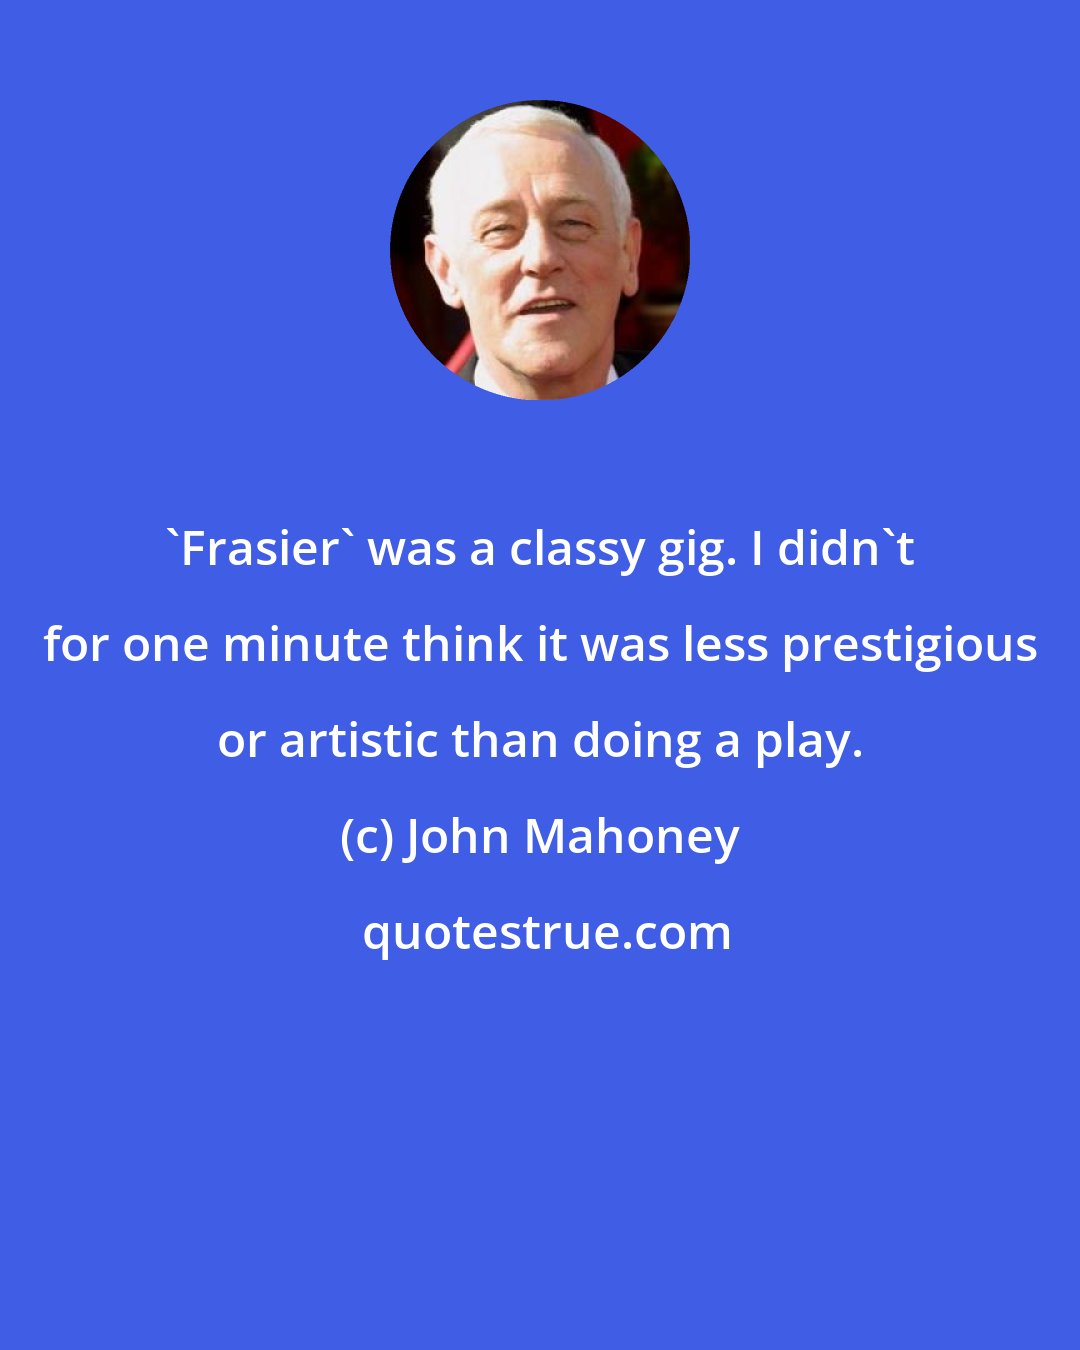 John Mahoney: 'Frasier' was a classy gig. I didn't for one minute think it was less prestigious or artistic than doing a play.